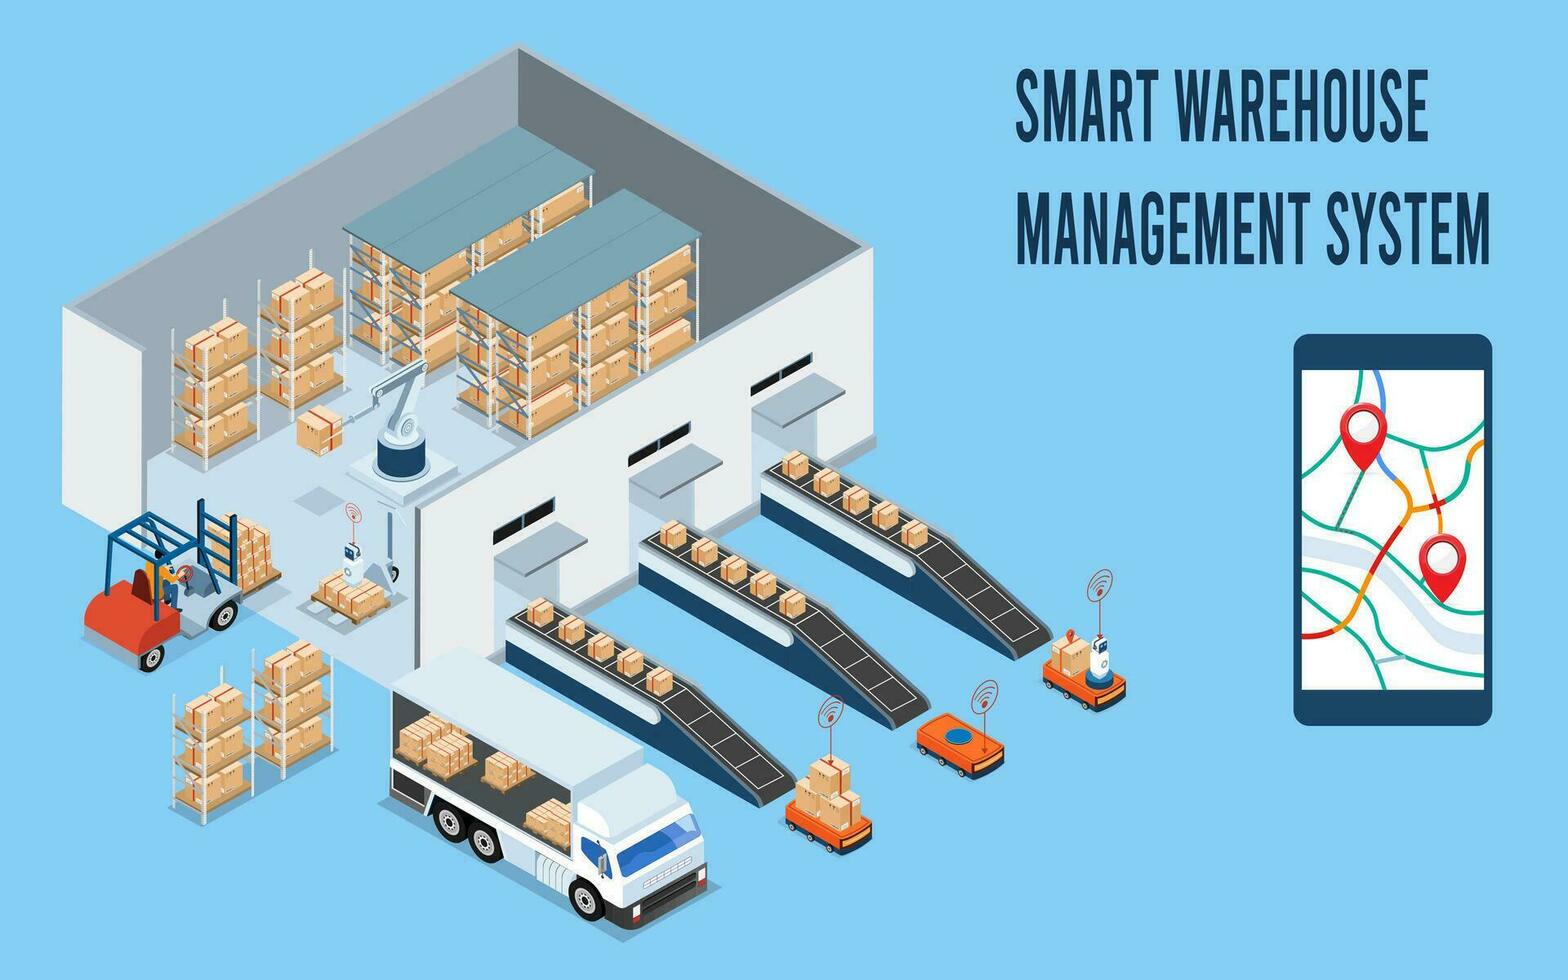 3D Isometric Smart Warehouse Management System with Warehouse simulation, Logistics flexibility, Robotic process automation and Accurate inventory counts. Vector illustration eps10